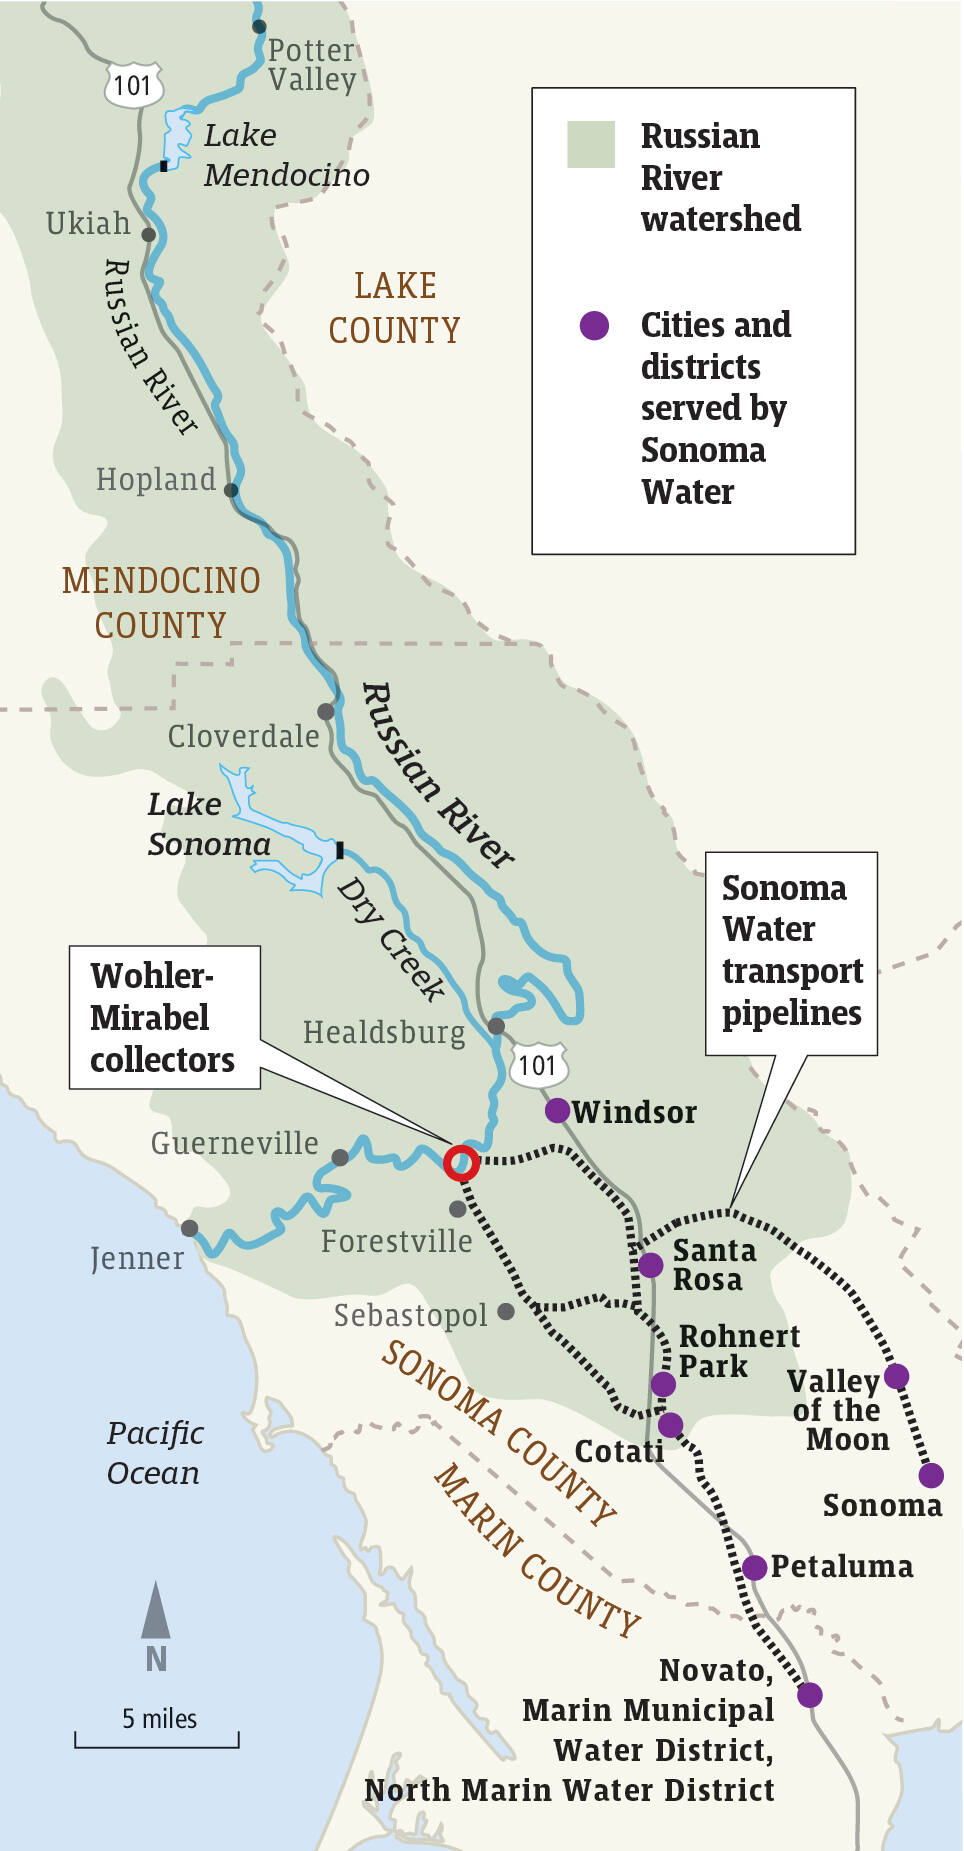 The Russian River watershed, which runs through Mendocino and Sonoma counties, supplies water to cities and towns along the river as well as to cities and districts served by the Sonoma Water. Source: Sonoma Water (Dennis Bolt / For The Press Democrat)